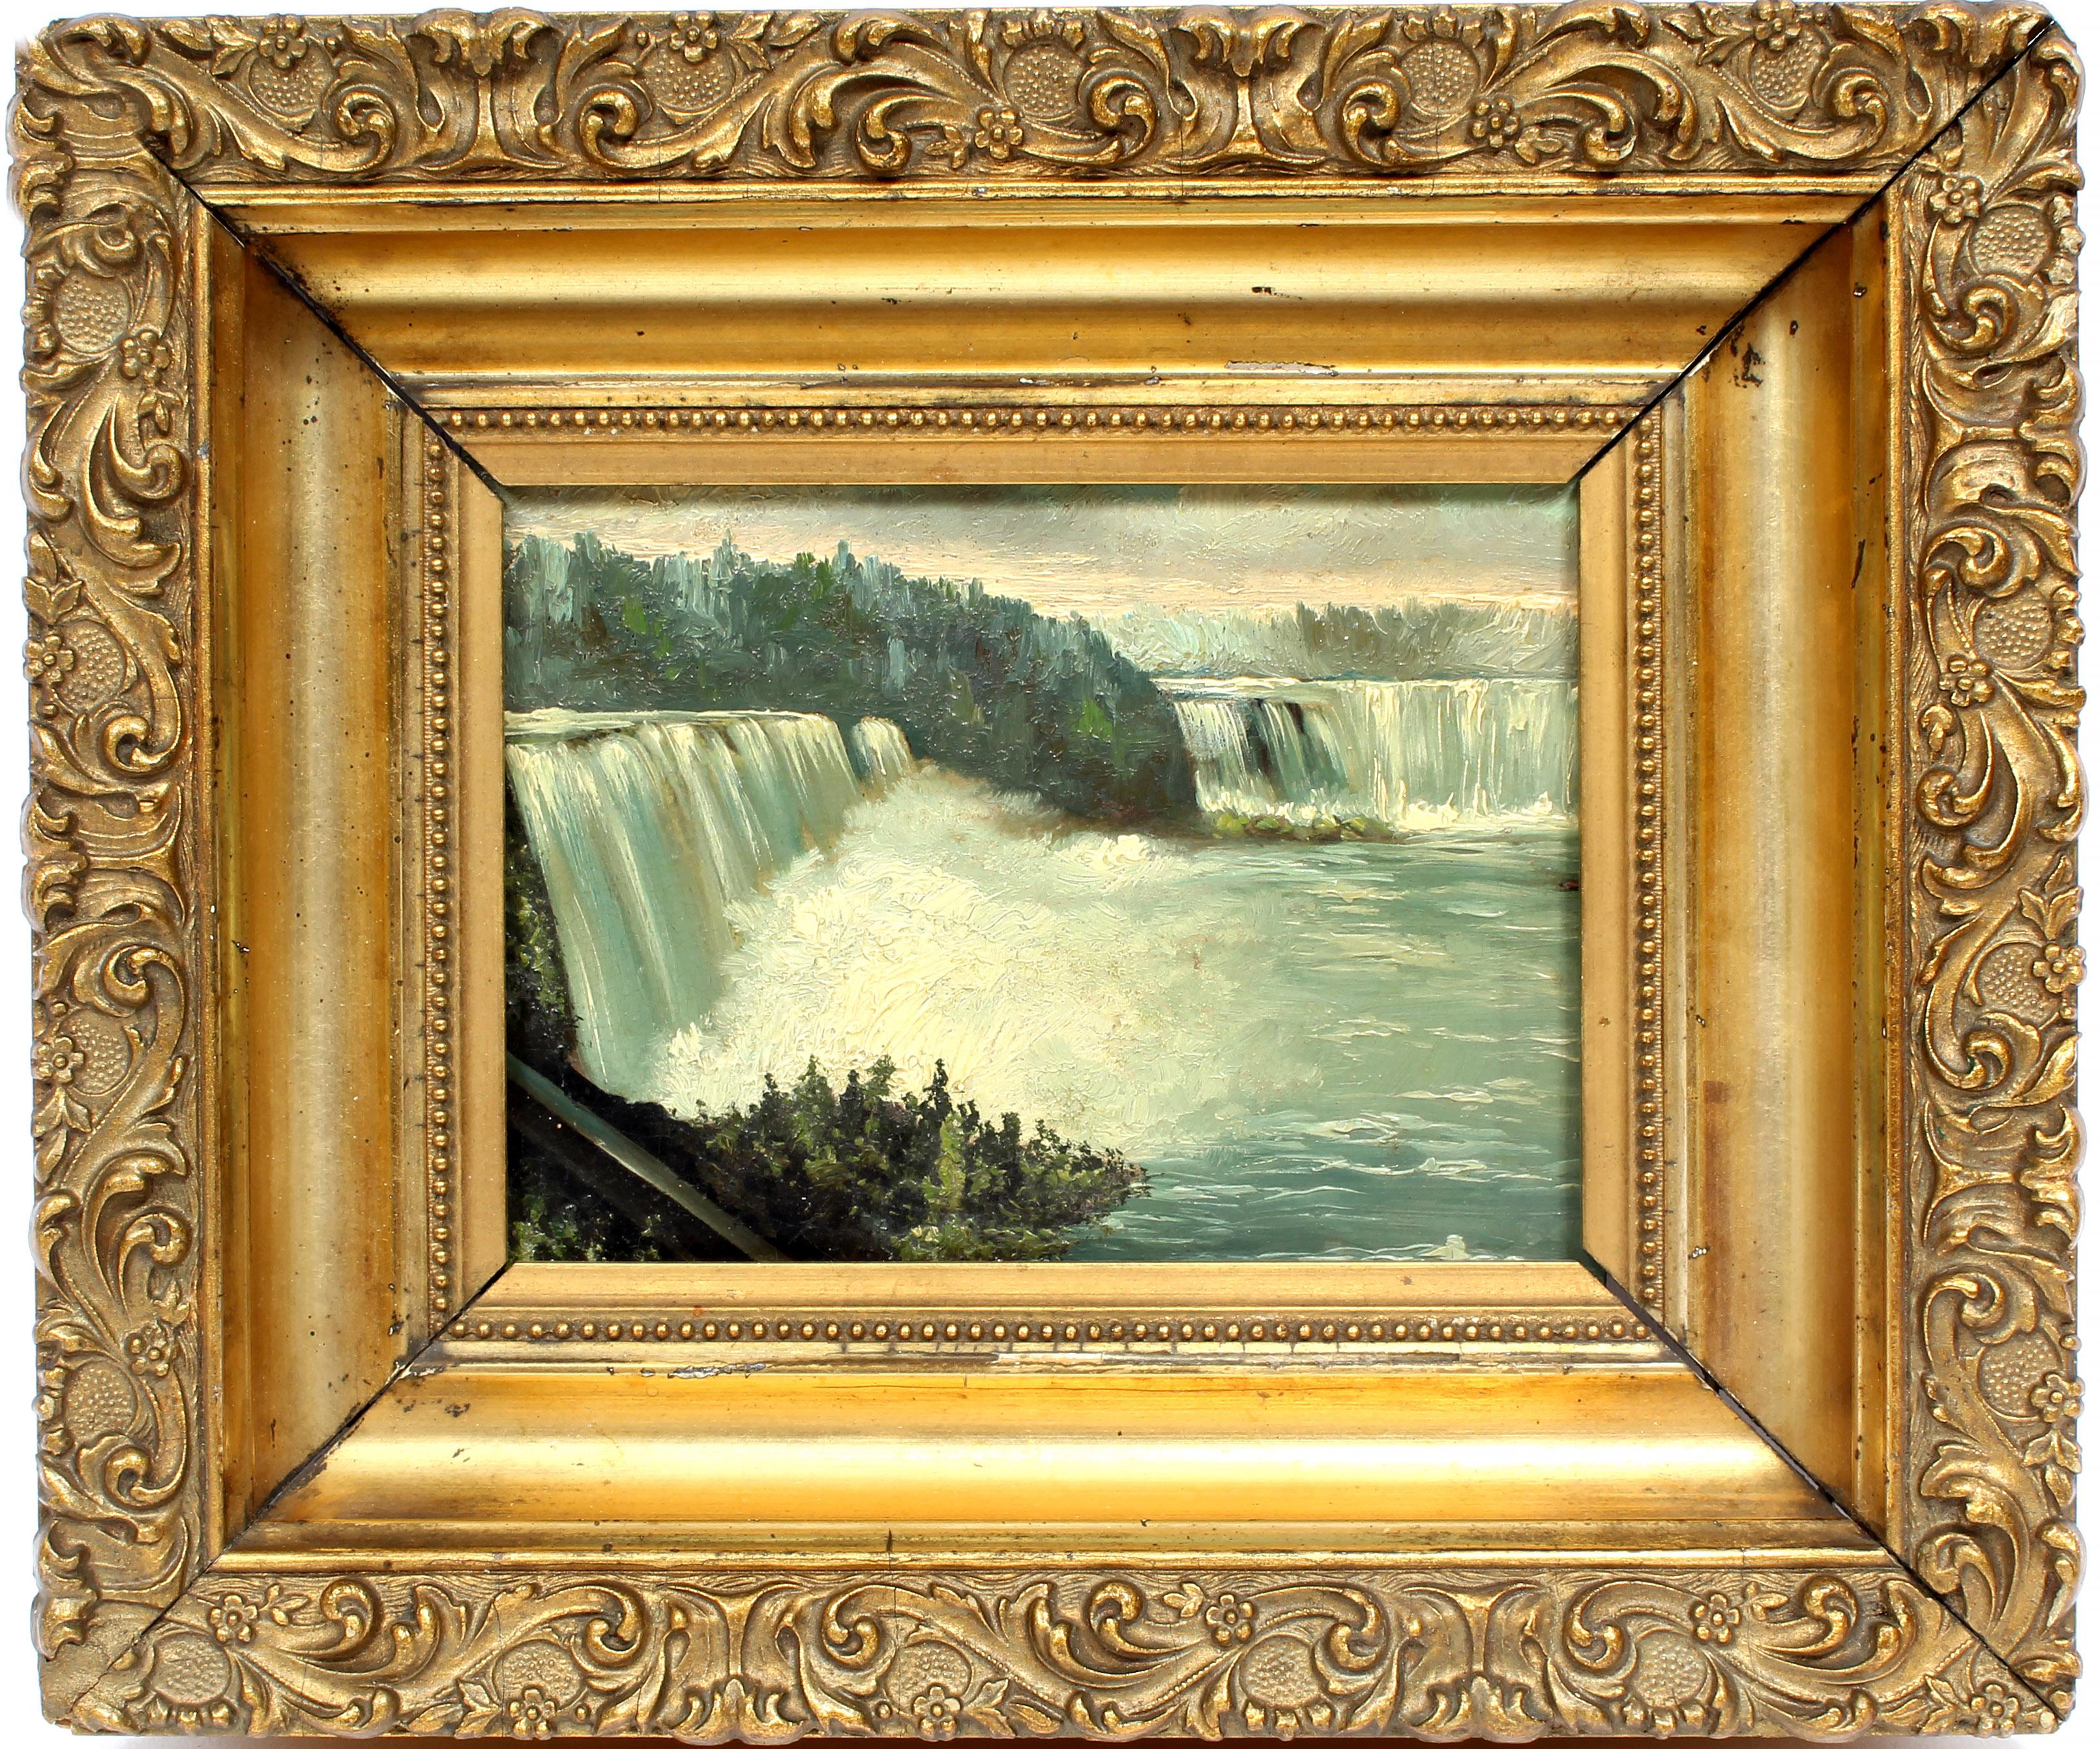 Unknown Landscape Painting - Niagara Falls Oil Painting Antique American Original Frame Maid of the Mist Rare